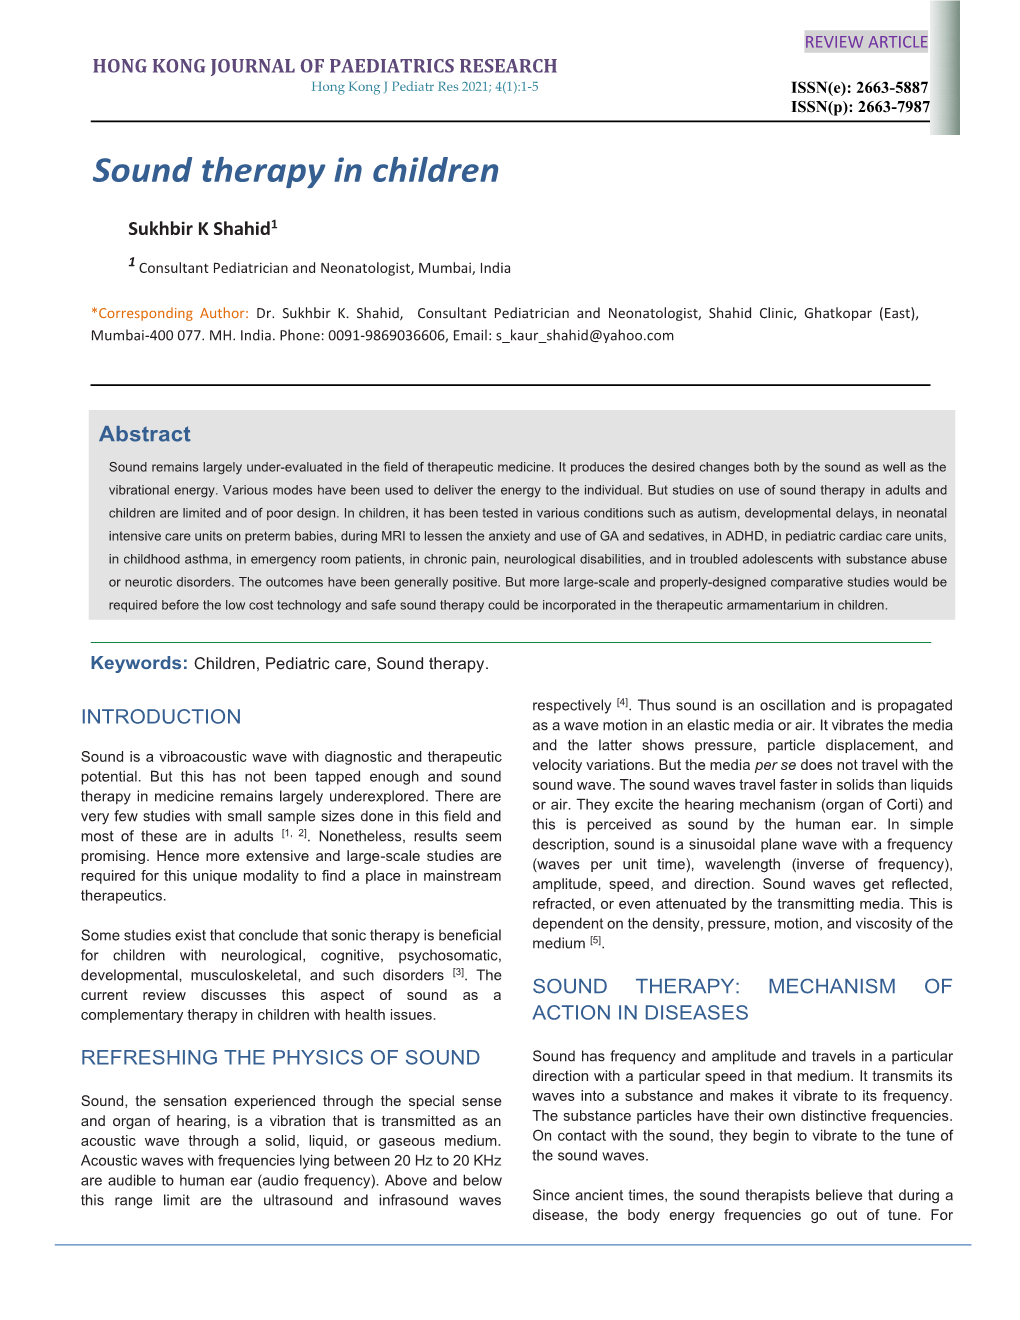 Sound Therapy in Children